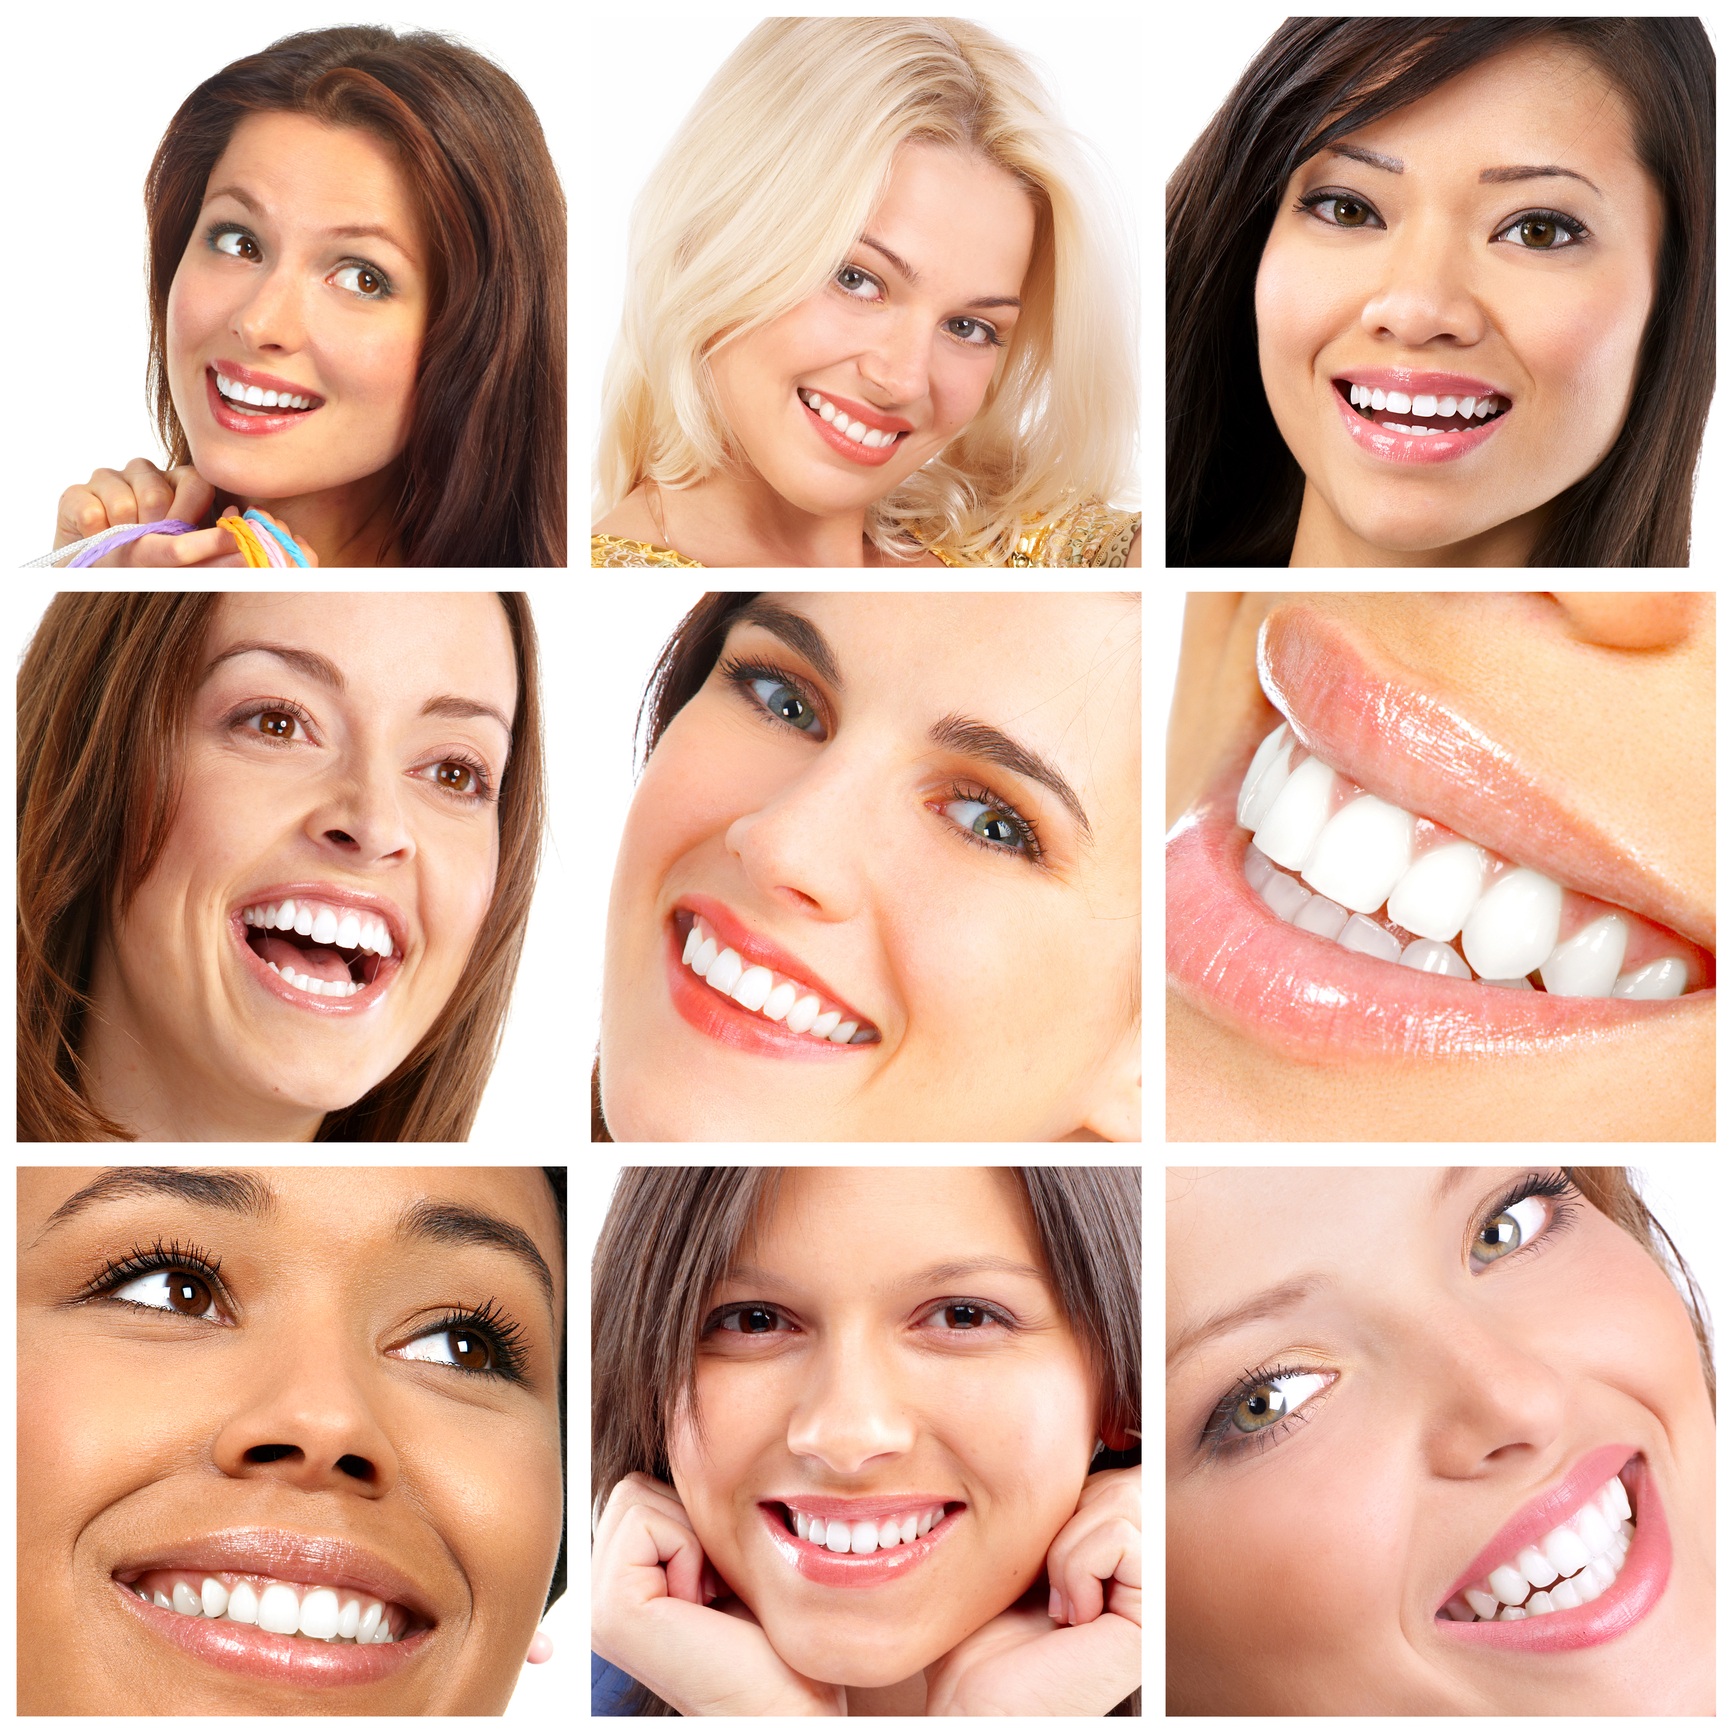 your financial situation should not impede your ability to get braces in Alberta